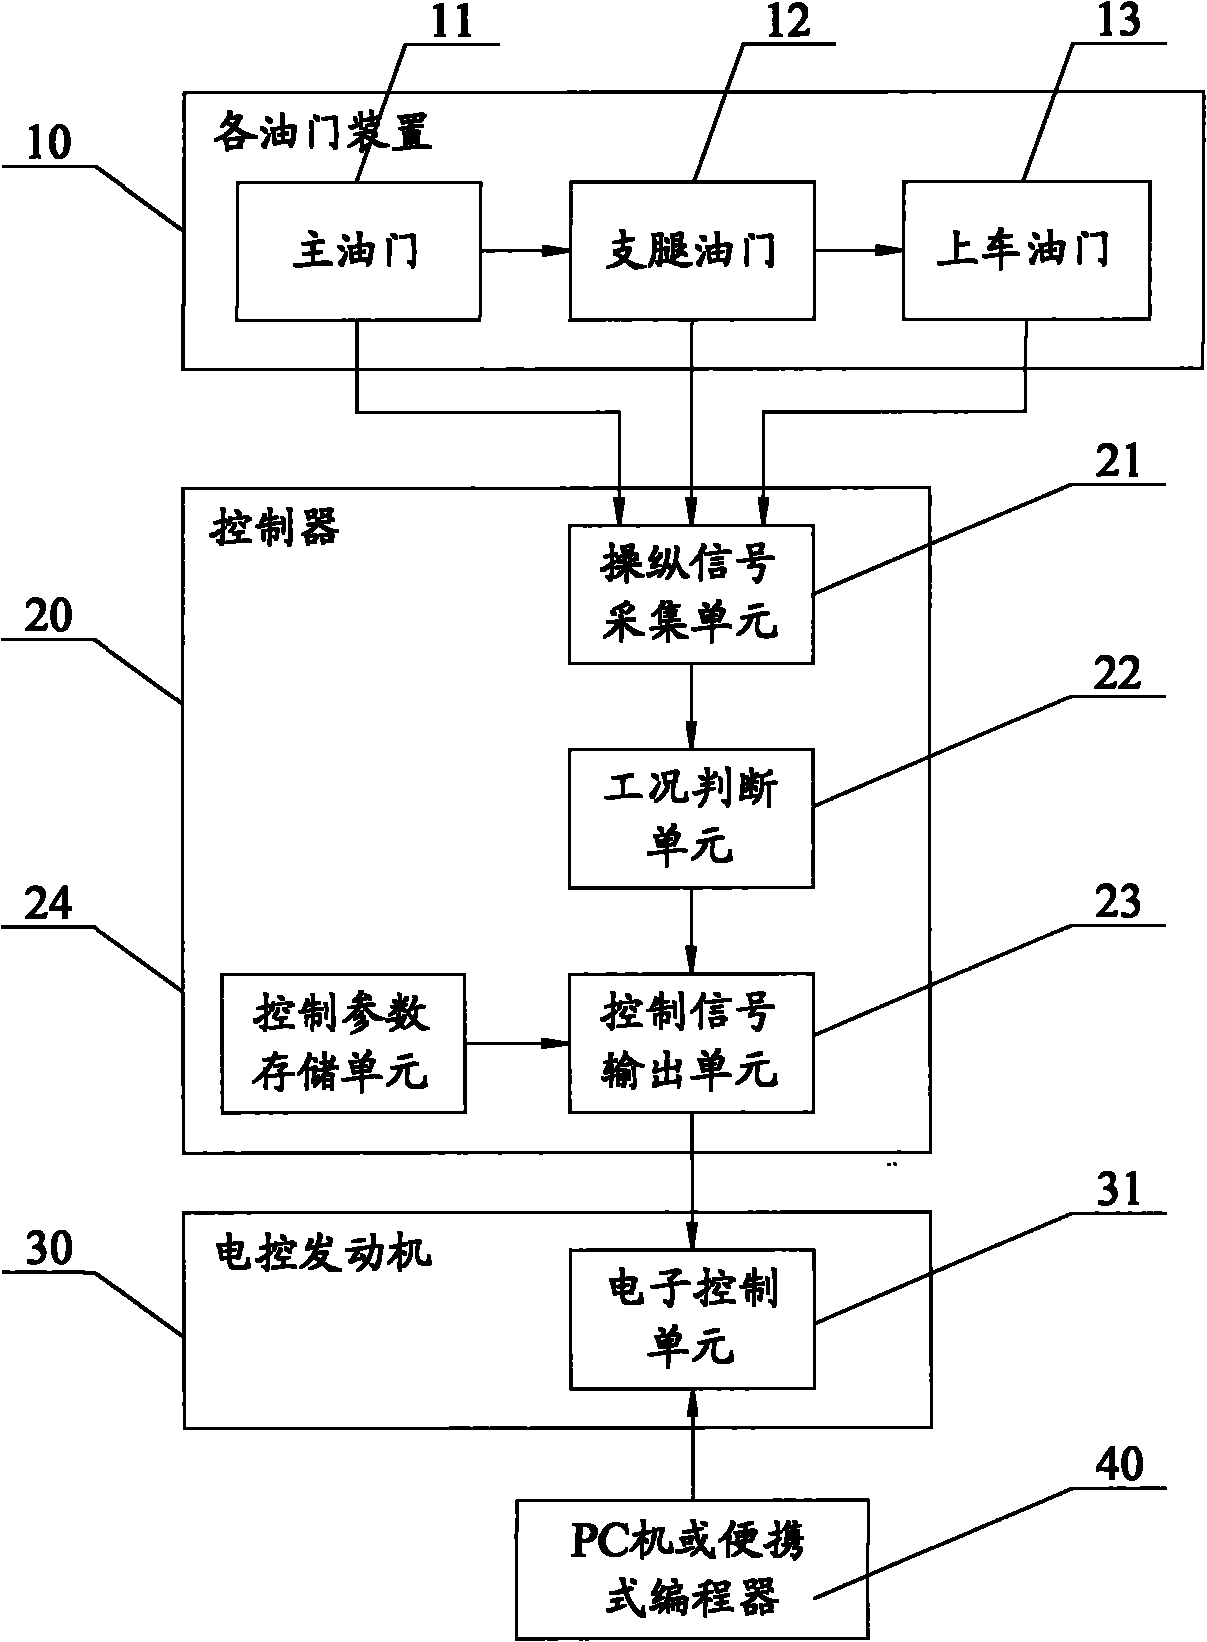 Multi-mode control method and system of electronic control engine and crane with system